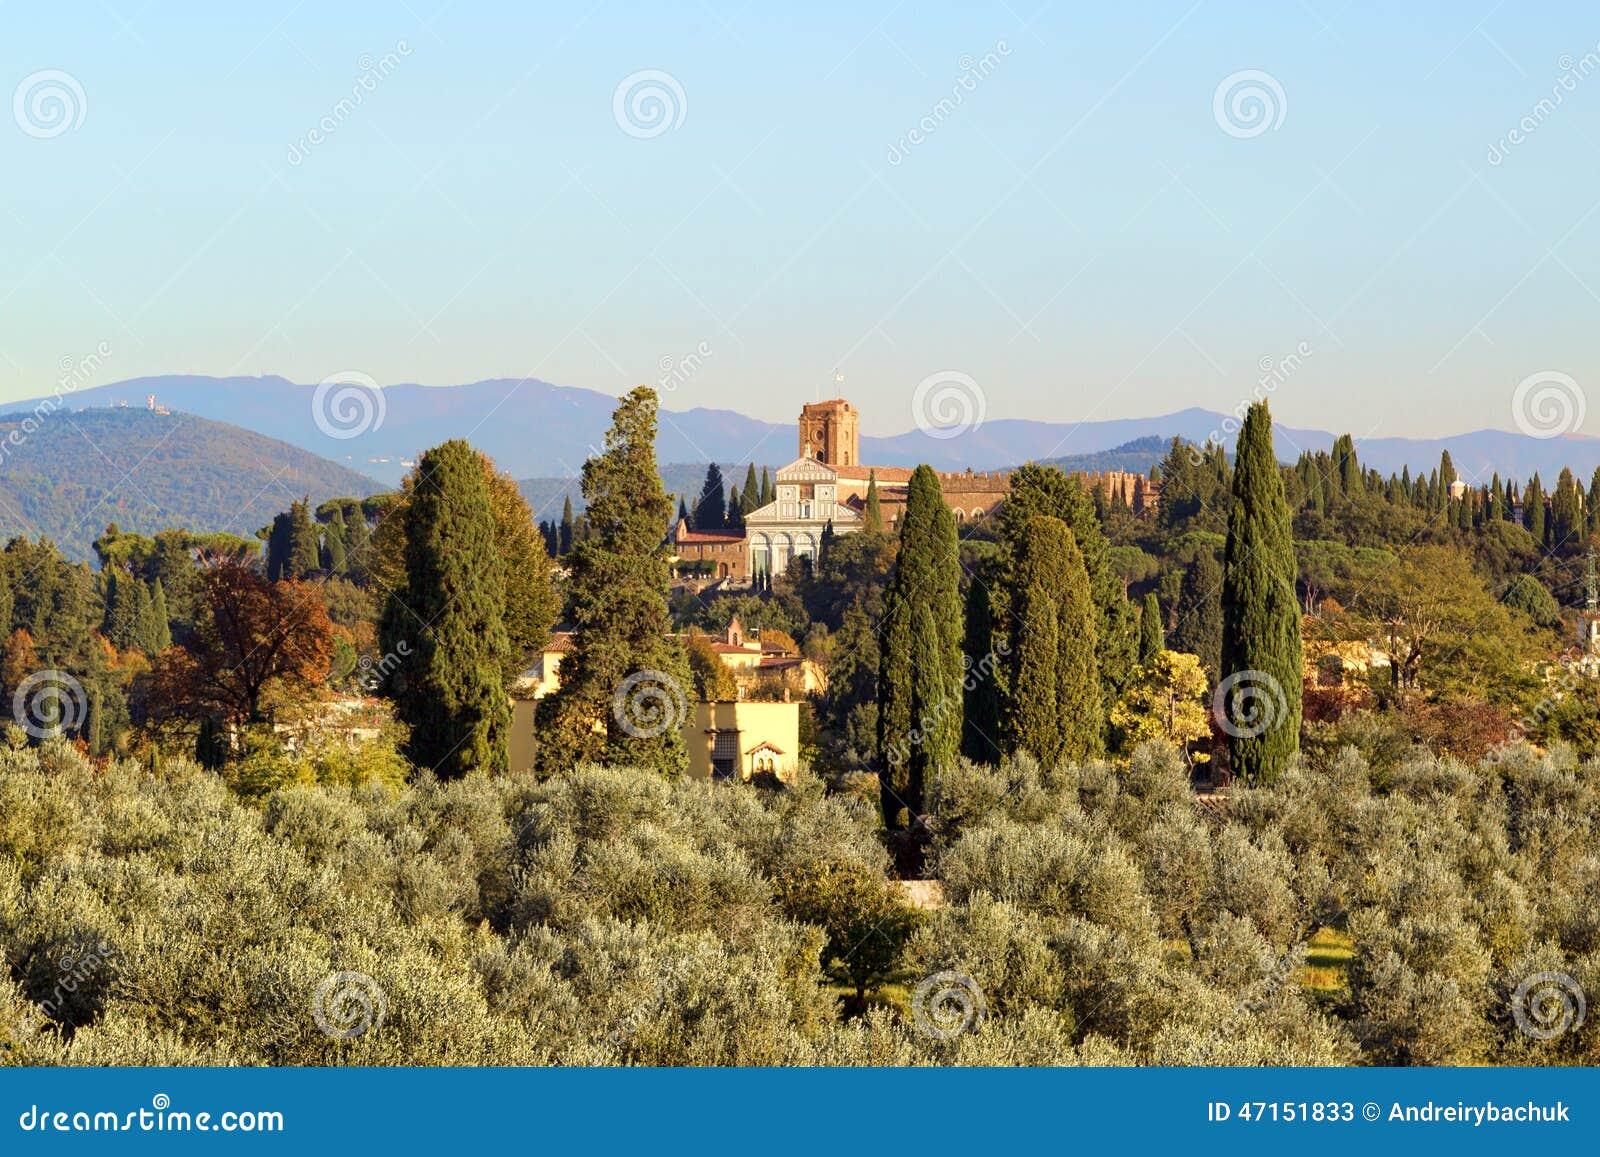 Olive Garden In Italy Stock Image Image Of Skies Seasons 47151833